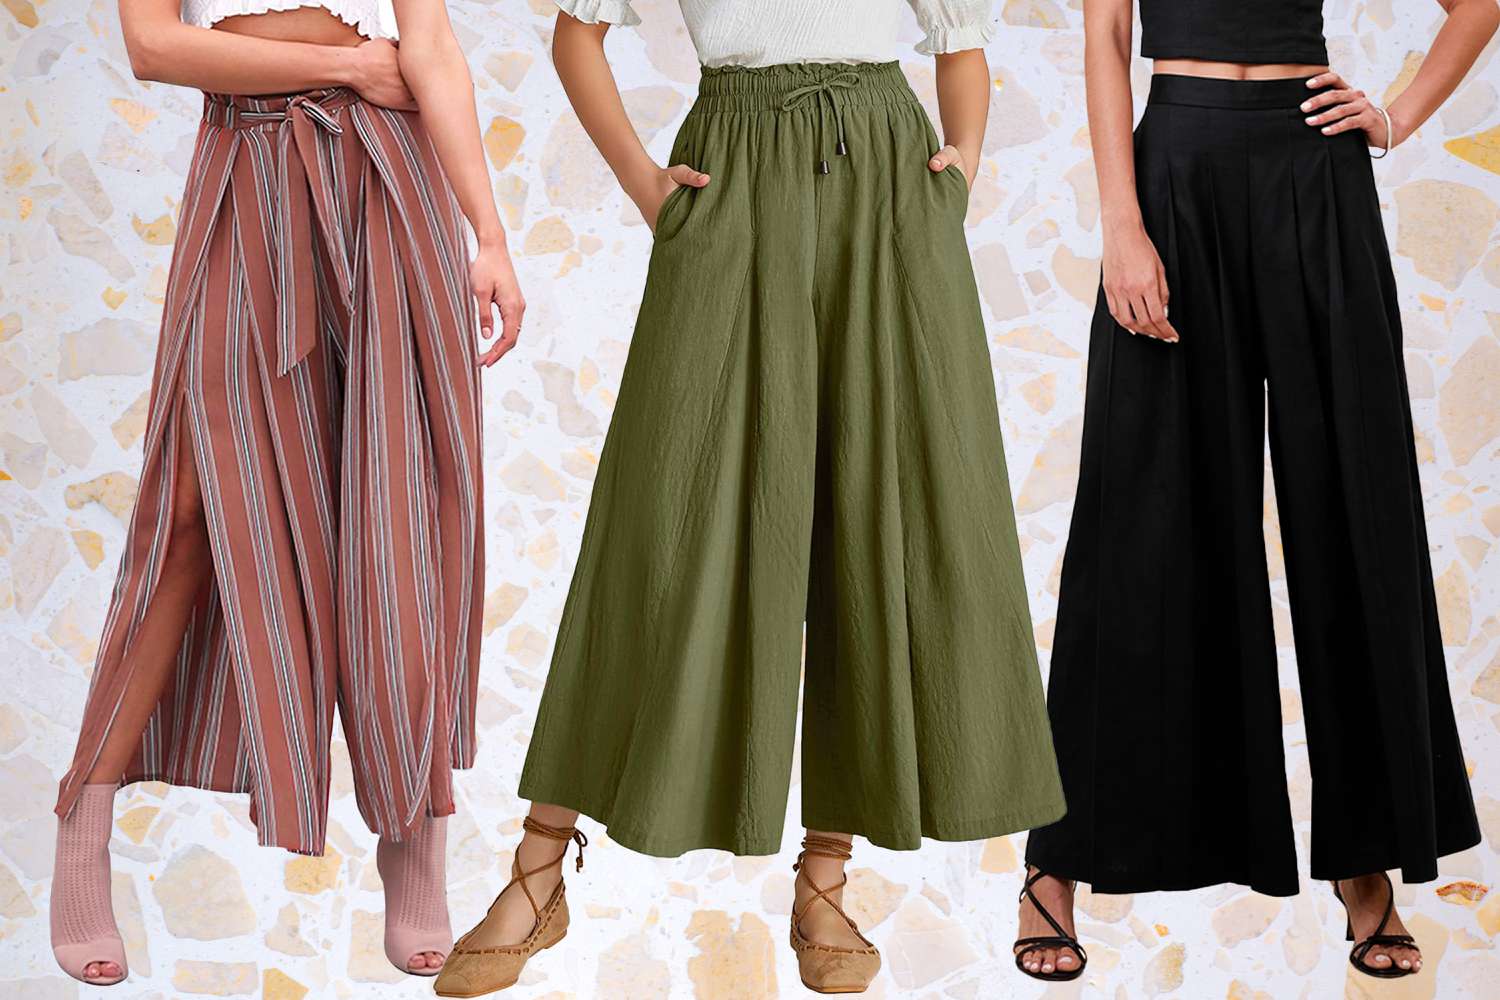 These Perfect, Flowy Palazzo Pants Are Summer's Ultimate Travel Bottoms — Shop Our 12 Favorite Pairs From $31